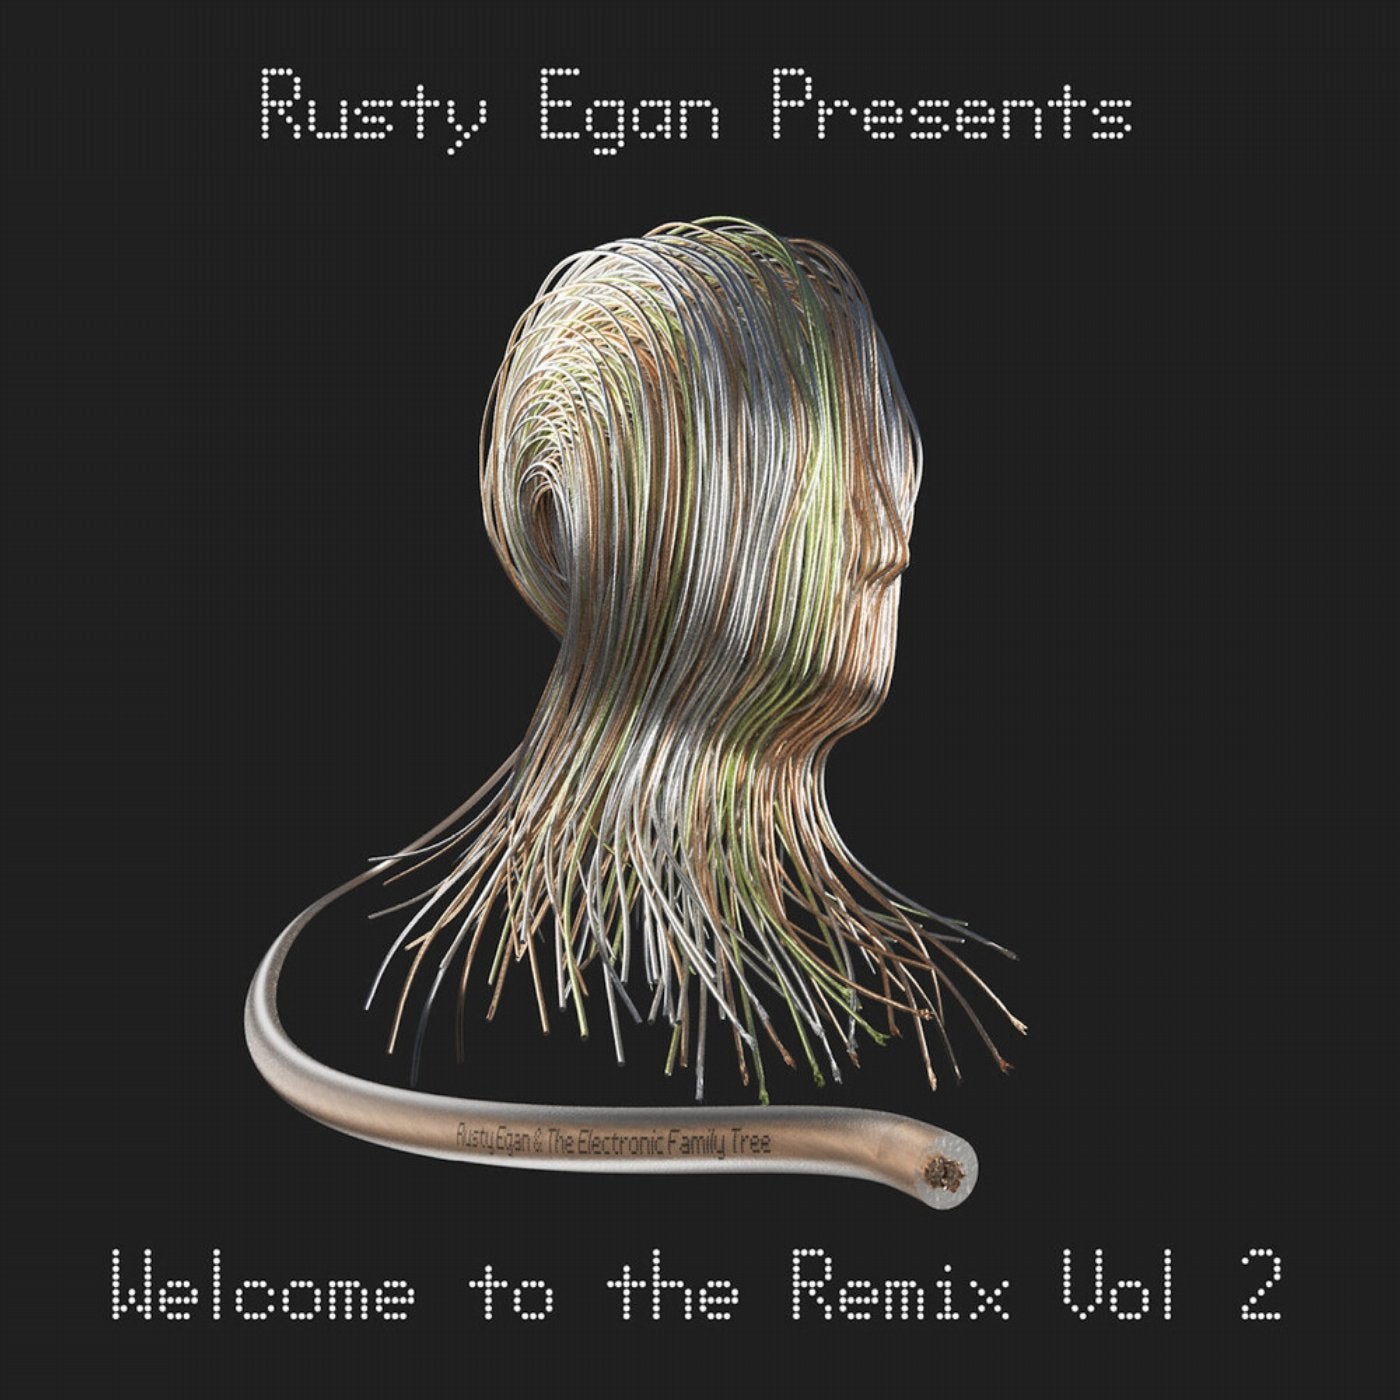 Rusty Egan Presents: Welcome to the Remix, Vol. 2